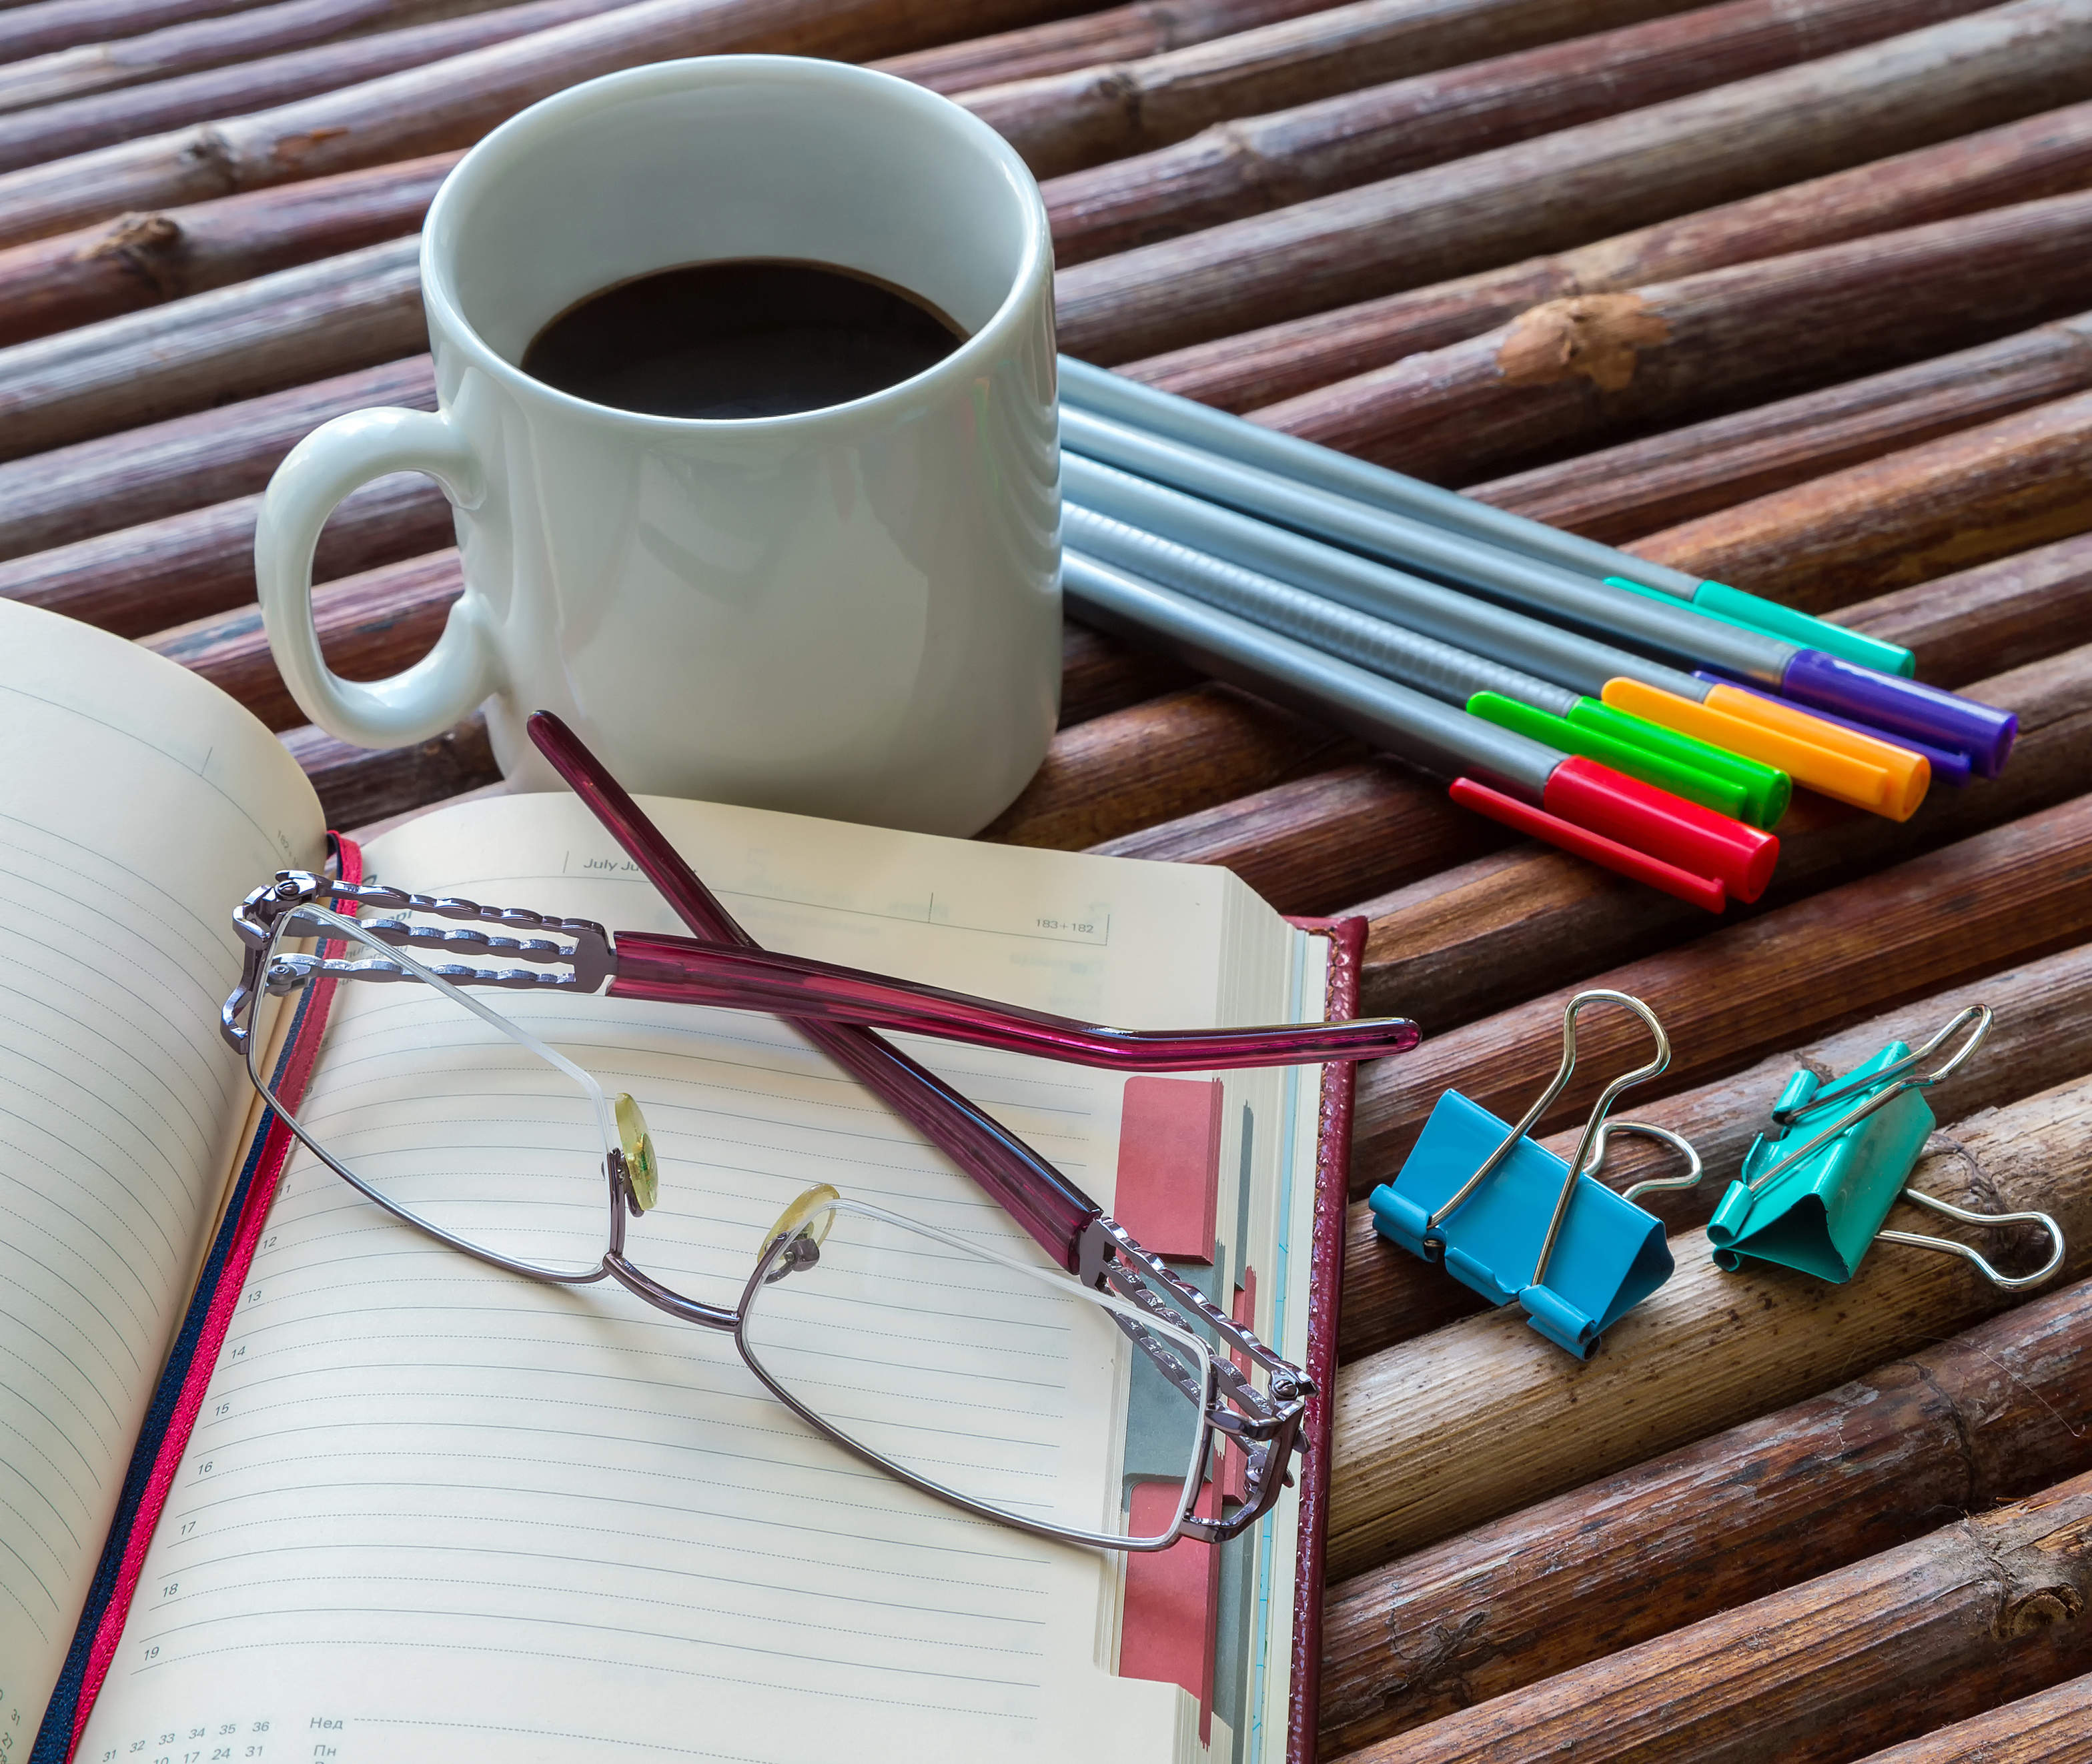 An open notebook, glasses, coffee in a mug, pens and clippers are laid out on a wooden surface